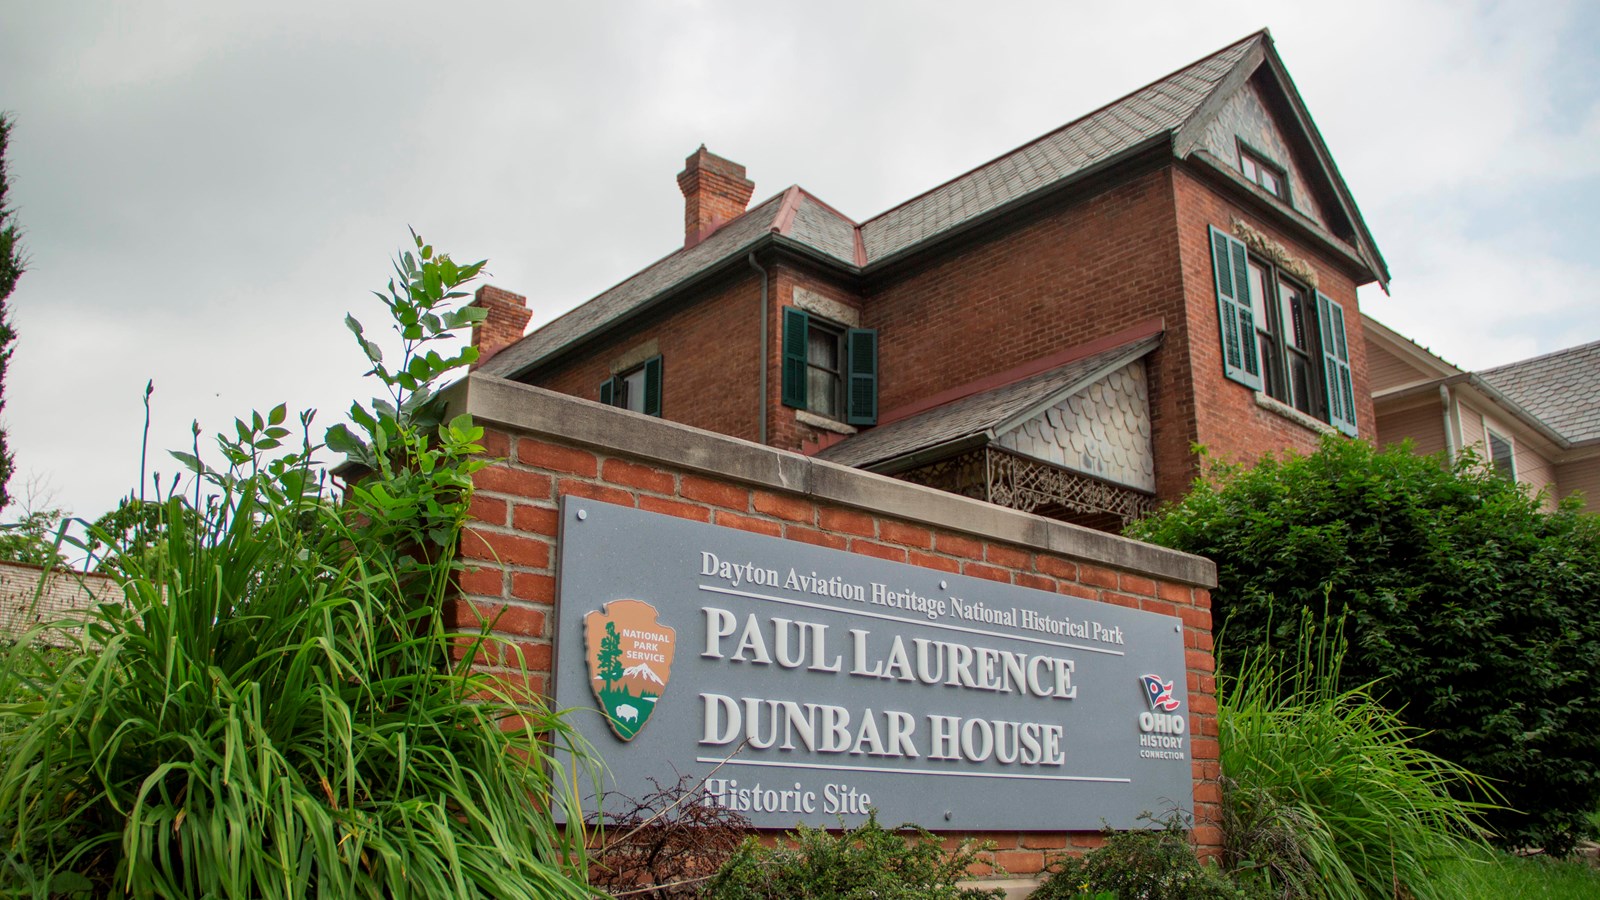 A sign reading Paul Laurence Dunbar House Historic Site in front of a brick house